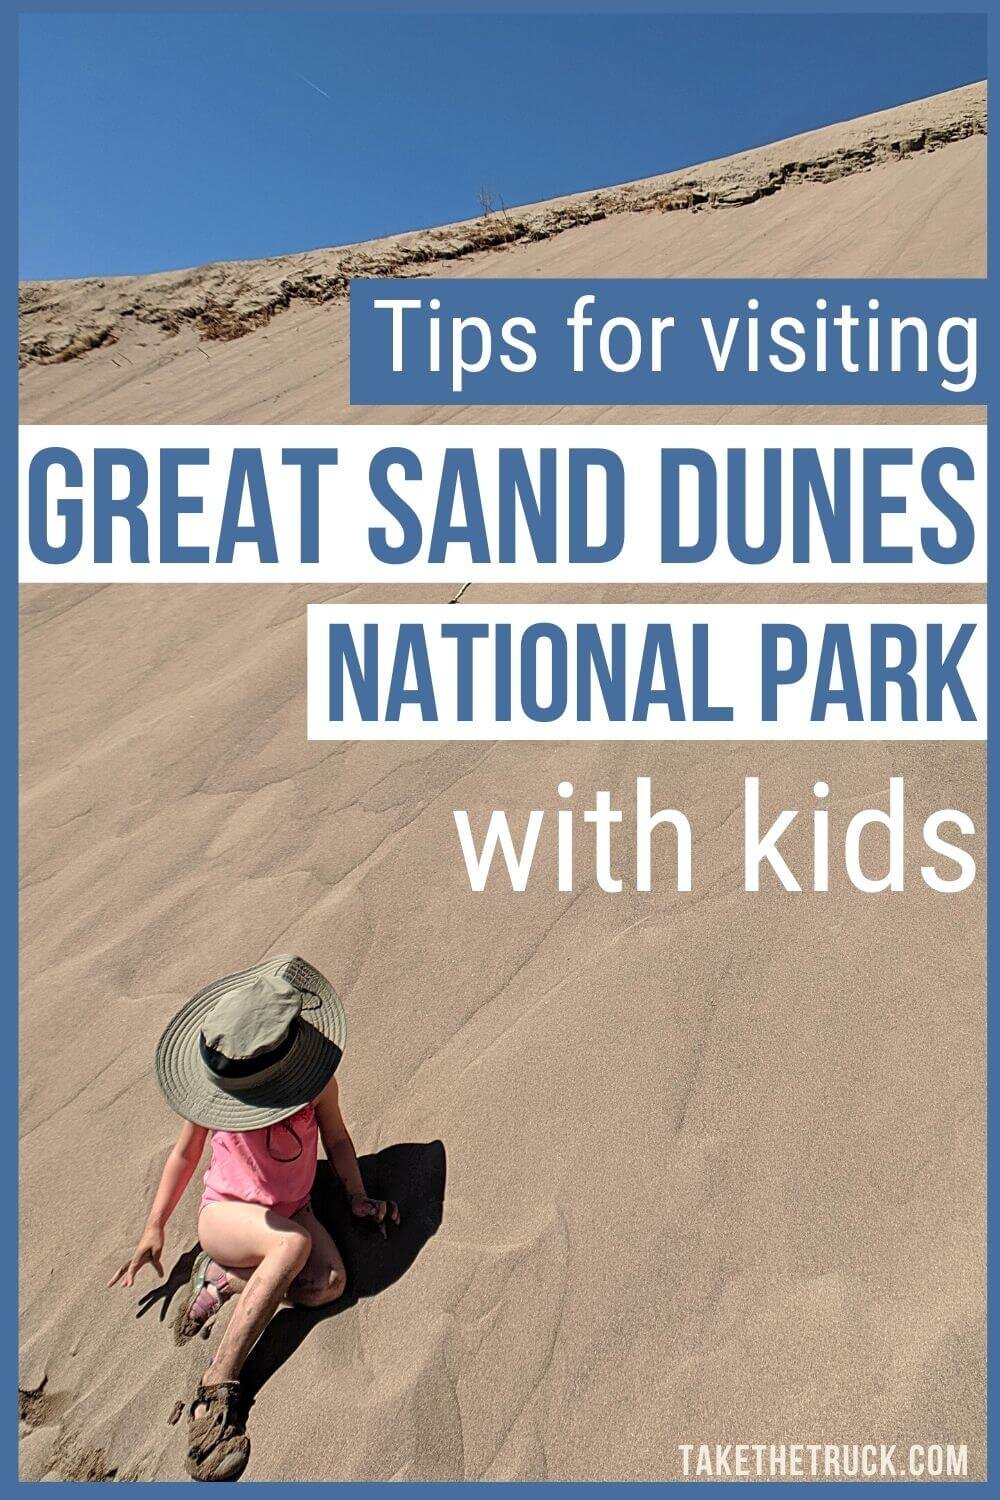 Visit Great Sand Dunes National Park with kids for a relaxing family vacation in Colorado! Check out this post to see why Sand Dunes National Park should be on your bucket list with kids.